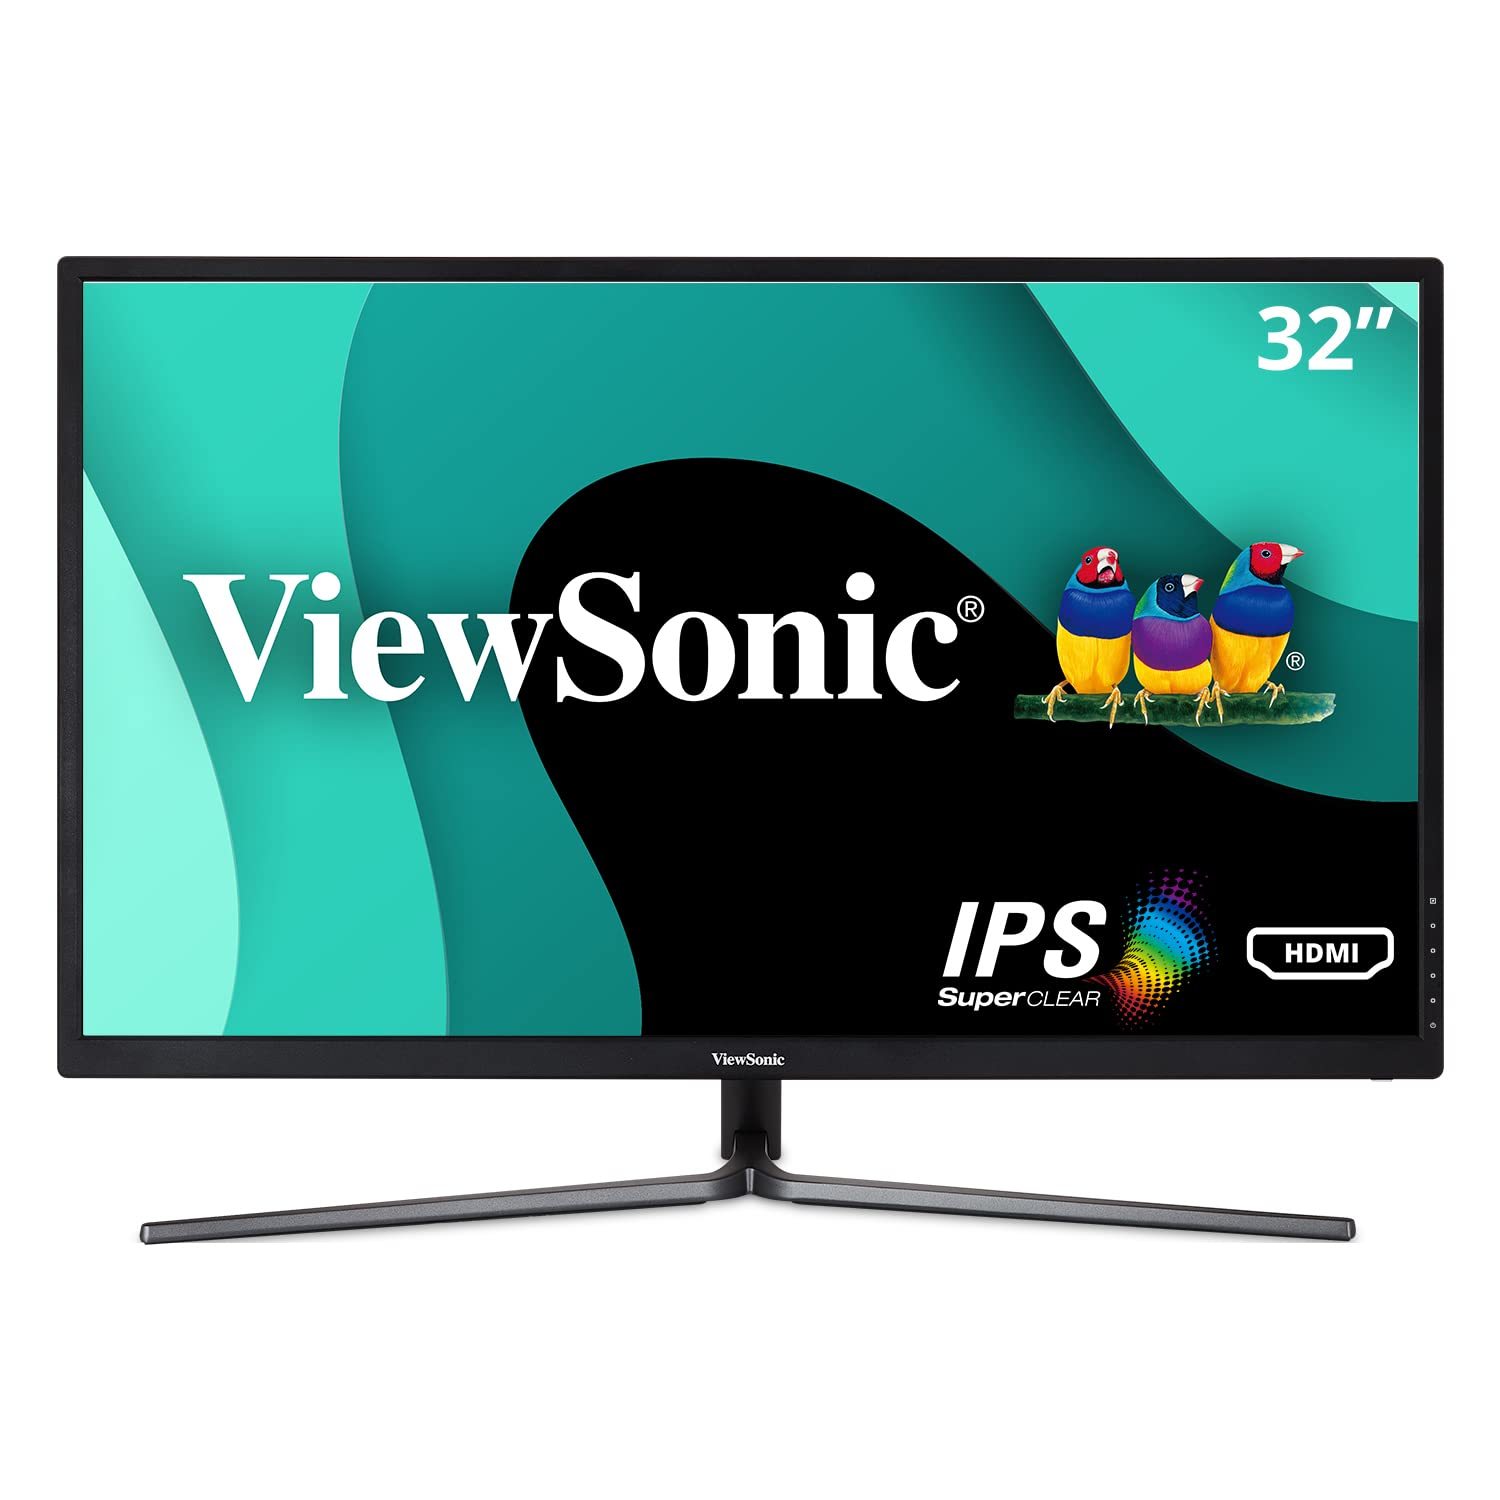 ViewSonic VX3211-2K-MHD 32 Inch IPS WQHD 1440p Monitor with 99% sRGB Color Cover - $500.99